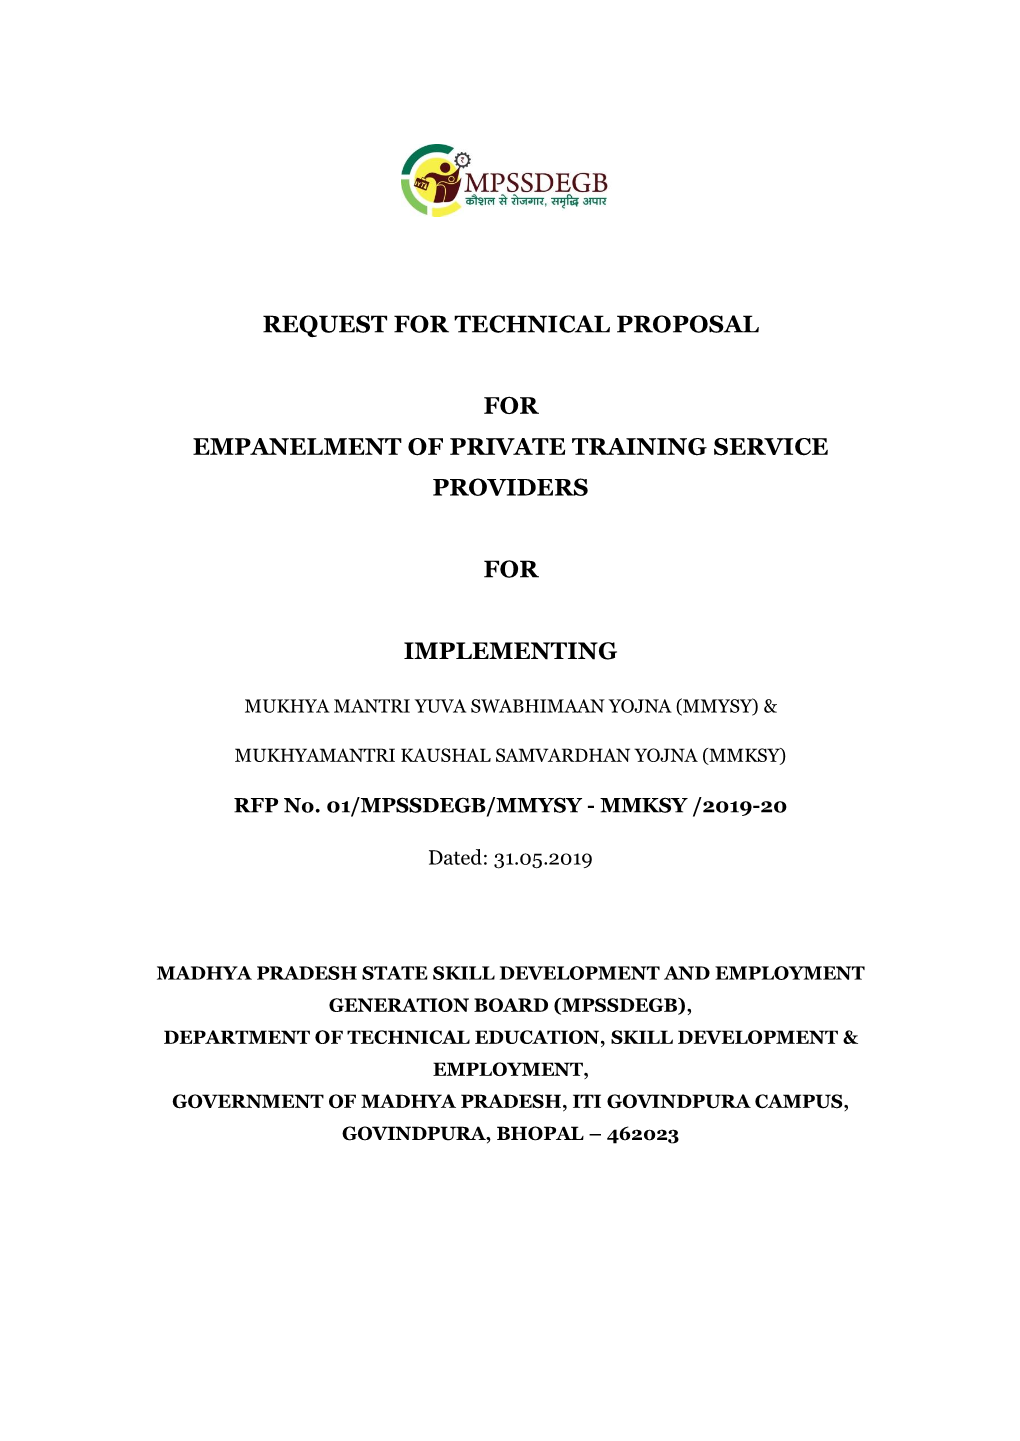 Request for Technical Proposal for Empanelment of Private Training Service Providers for Implementing